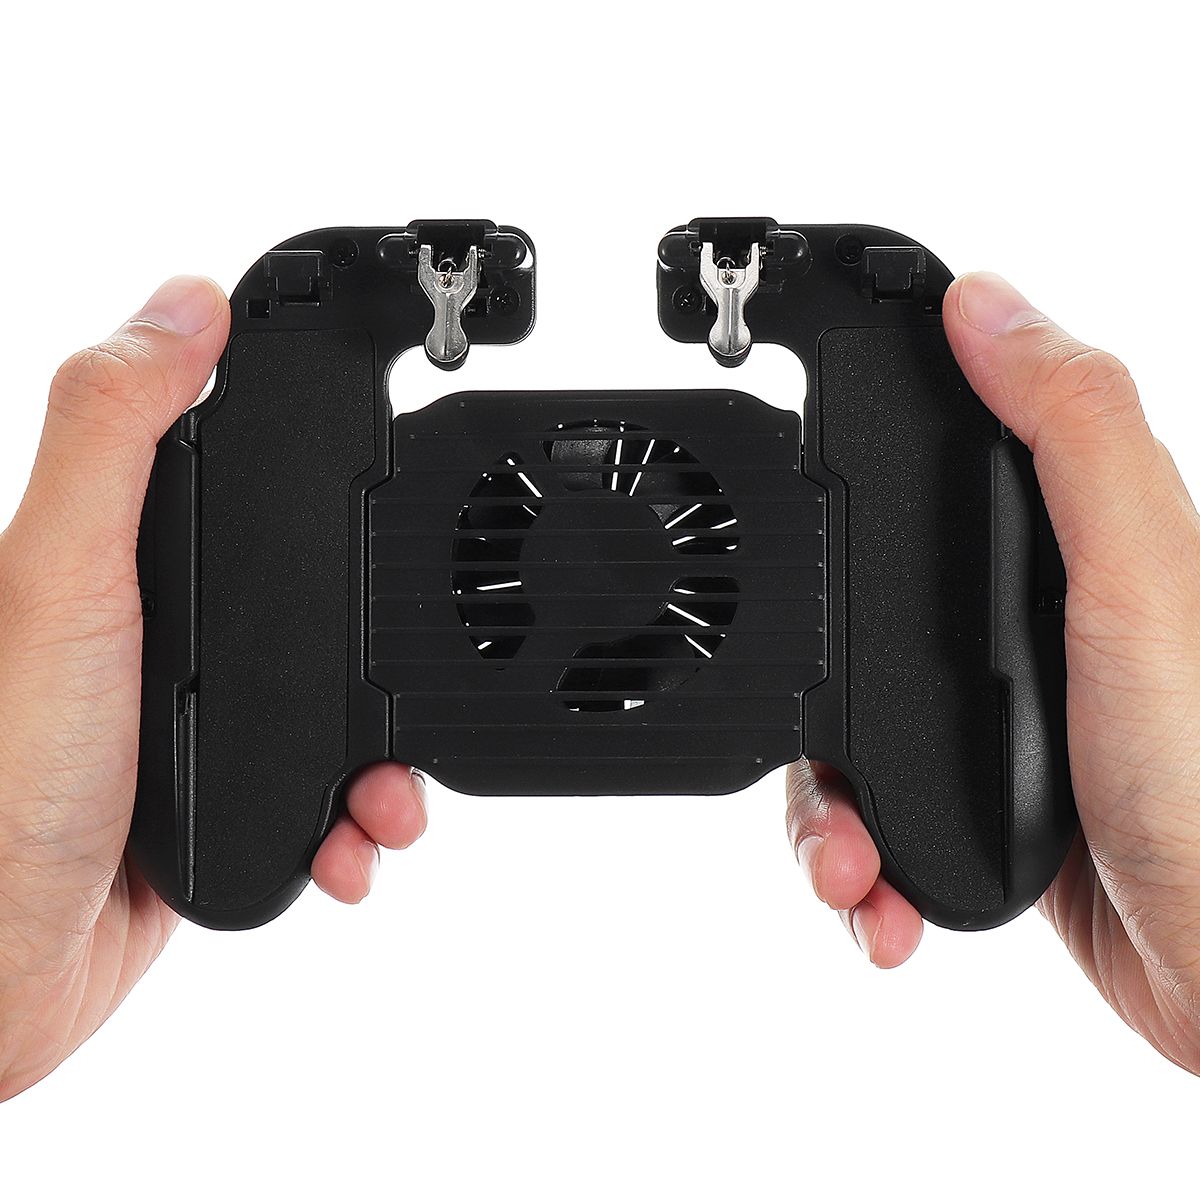 Gamepad-Controller-Joystick-Cooling-Fan-Bracket-Holder-for-PUBG-Mobile-Game-for-IOS-Android-Phone-1519082